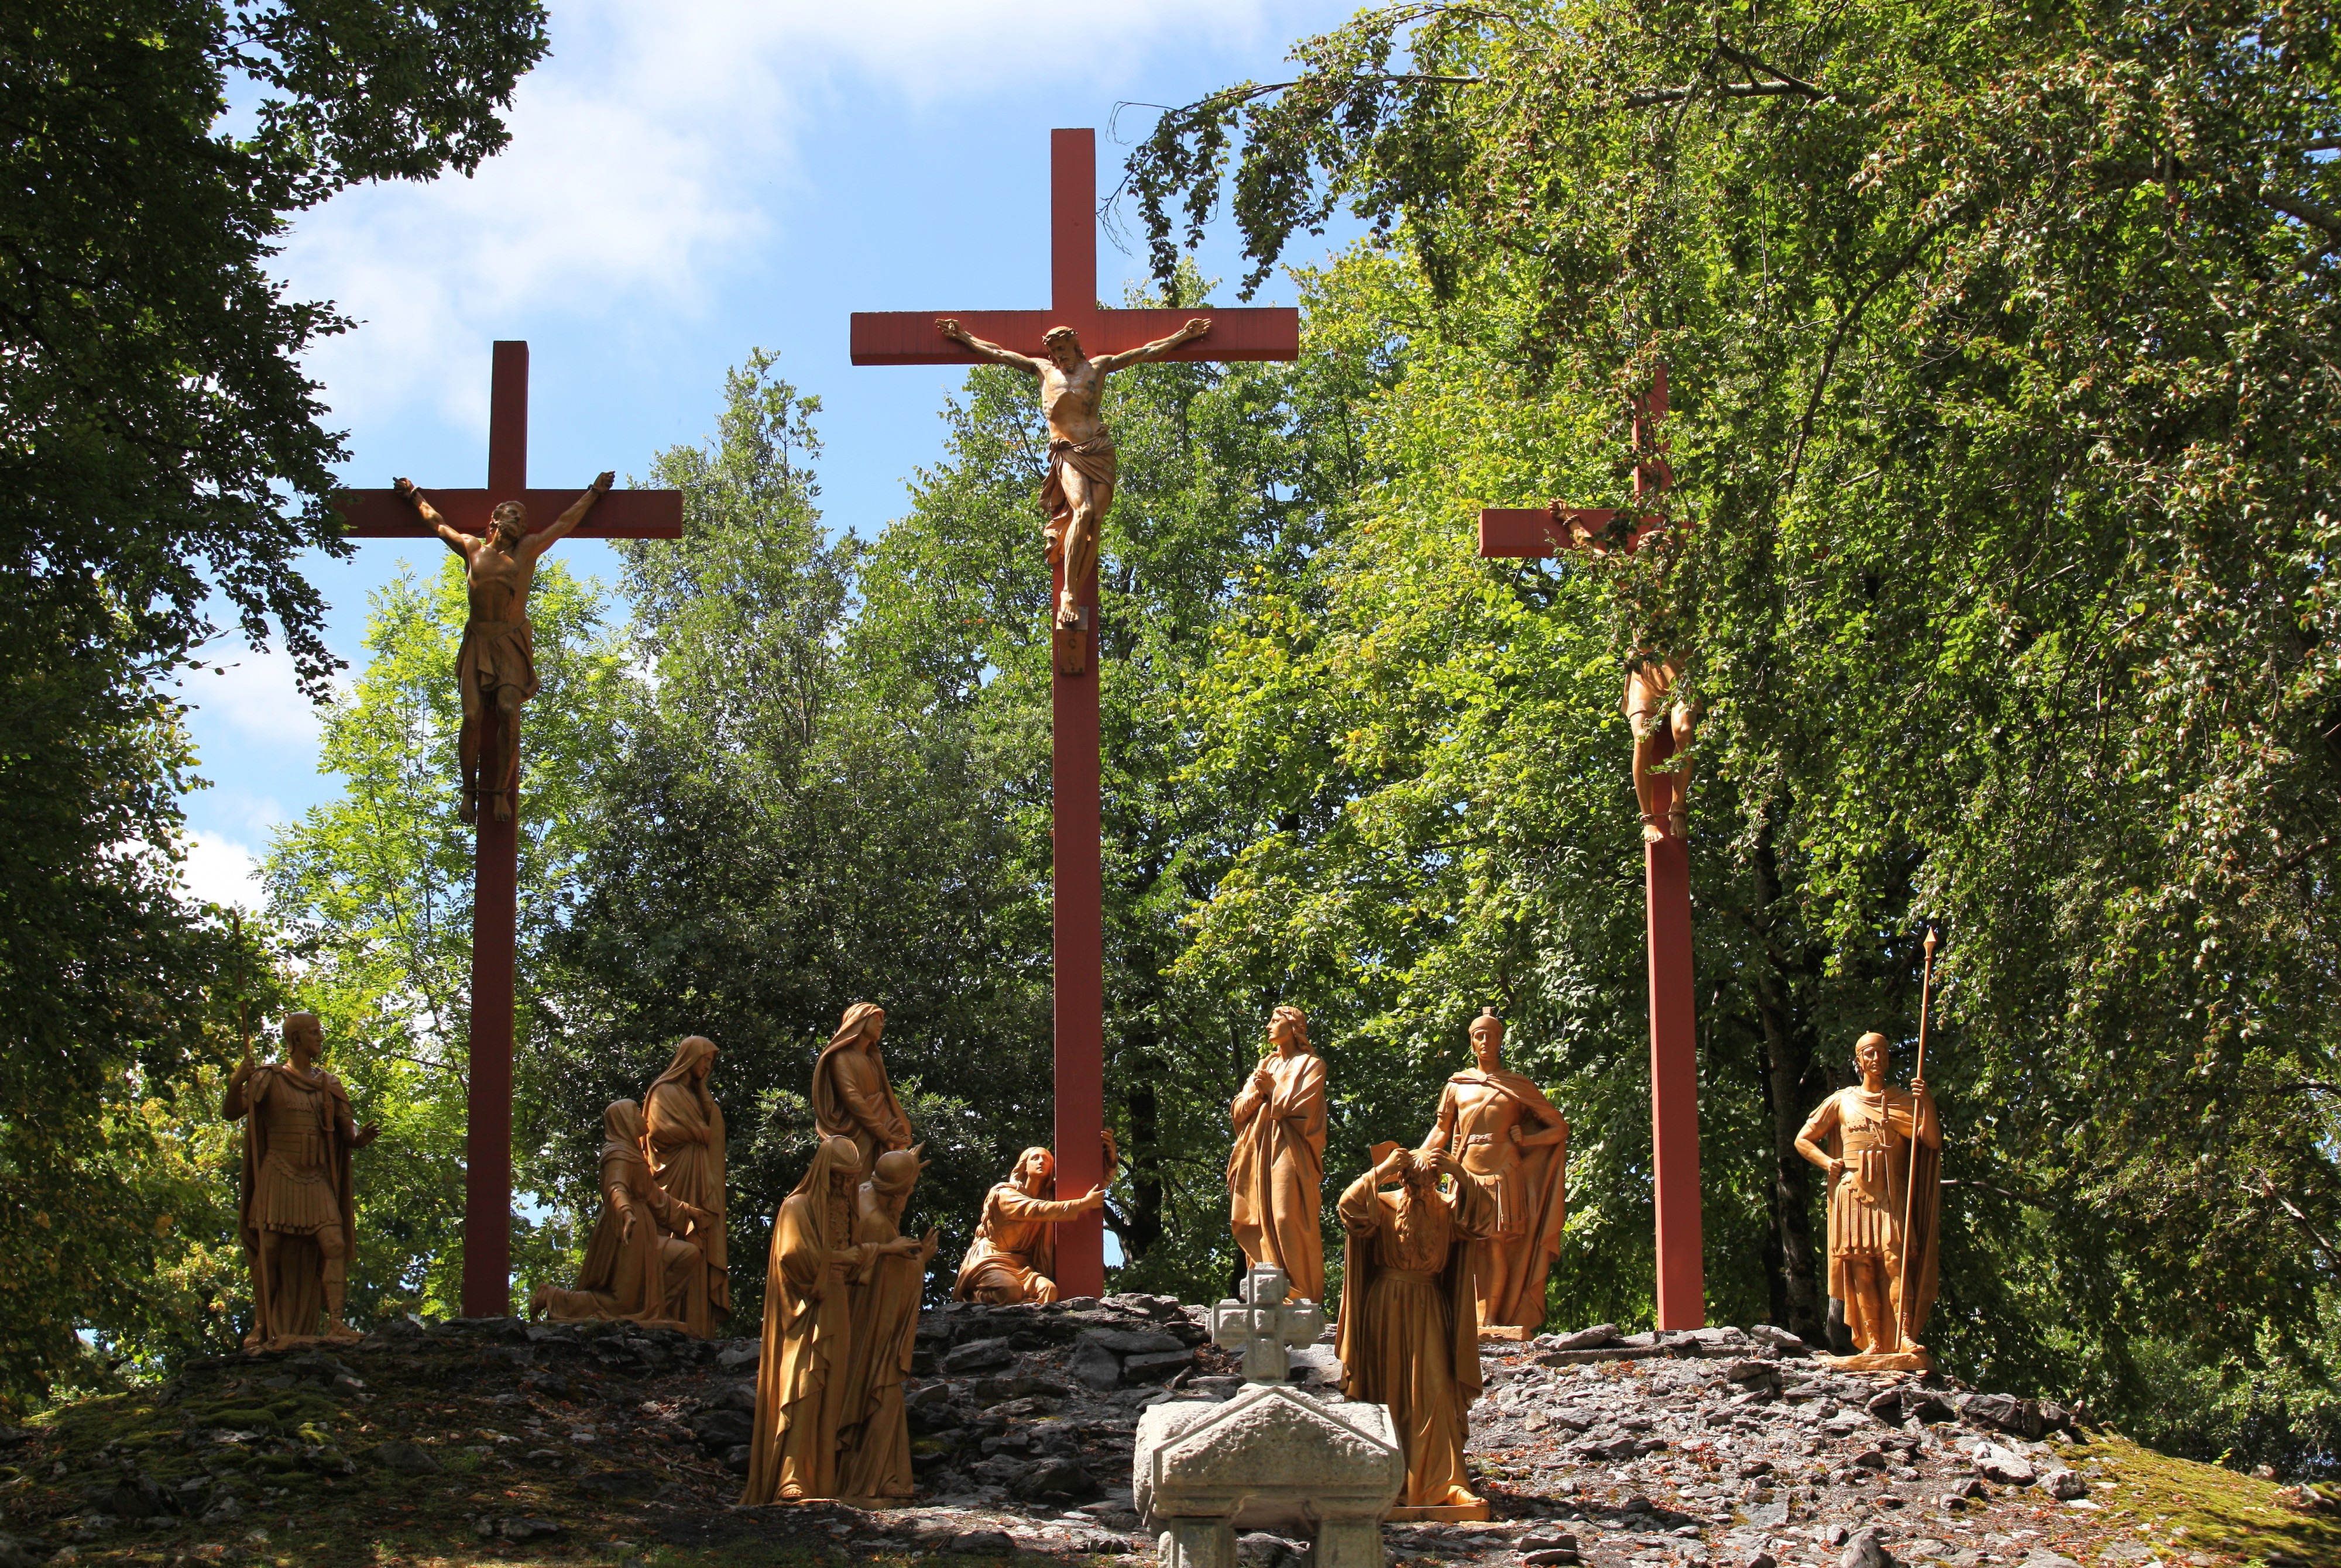 the Way of the Cross in Lourdes, France, August 2013, station 12/14